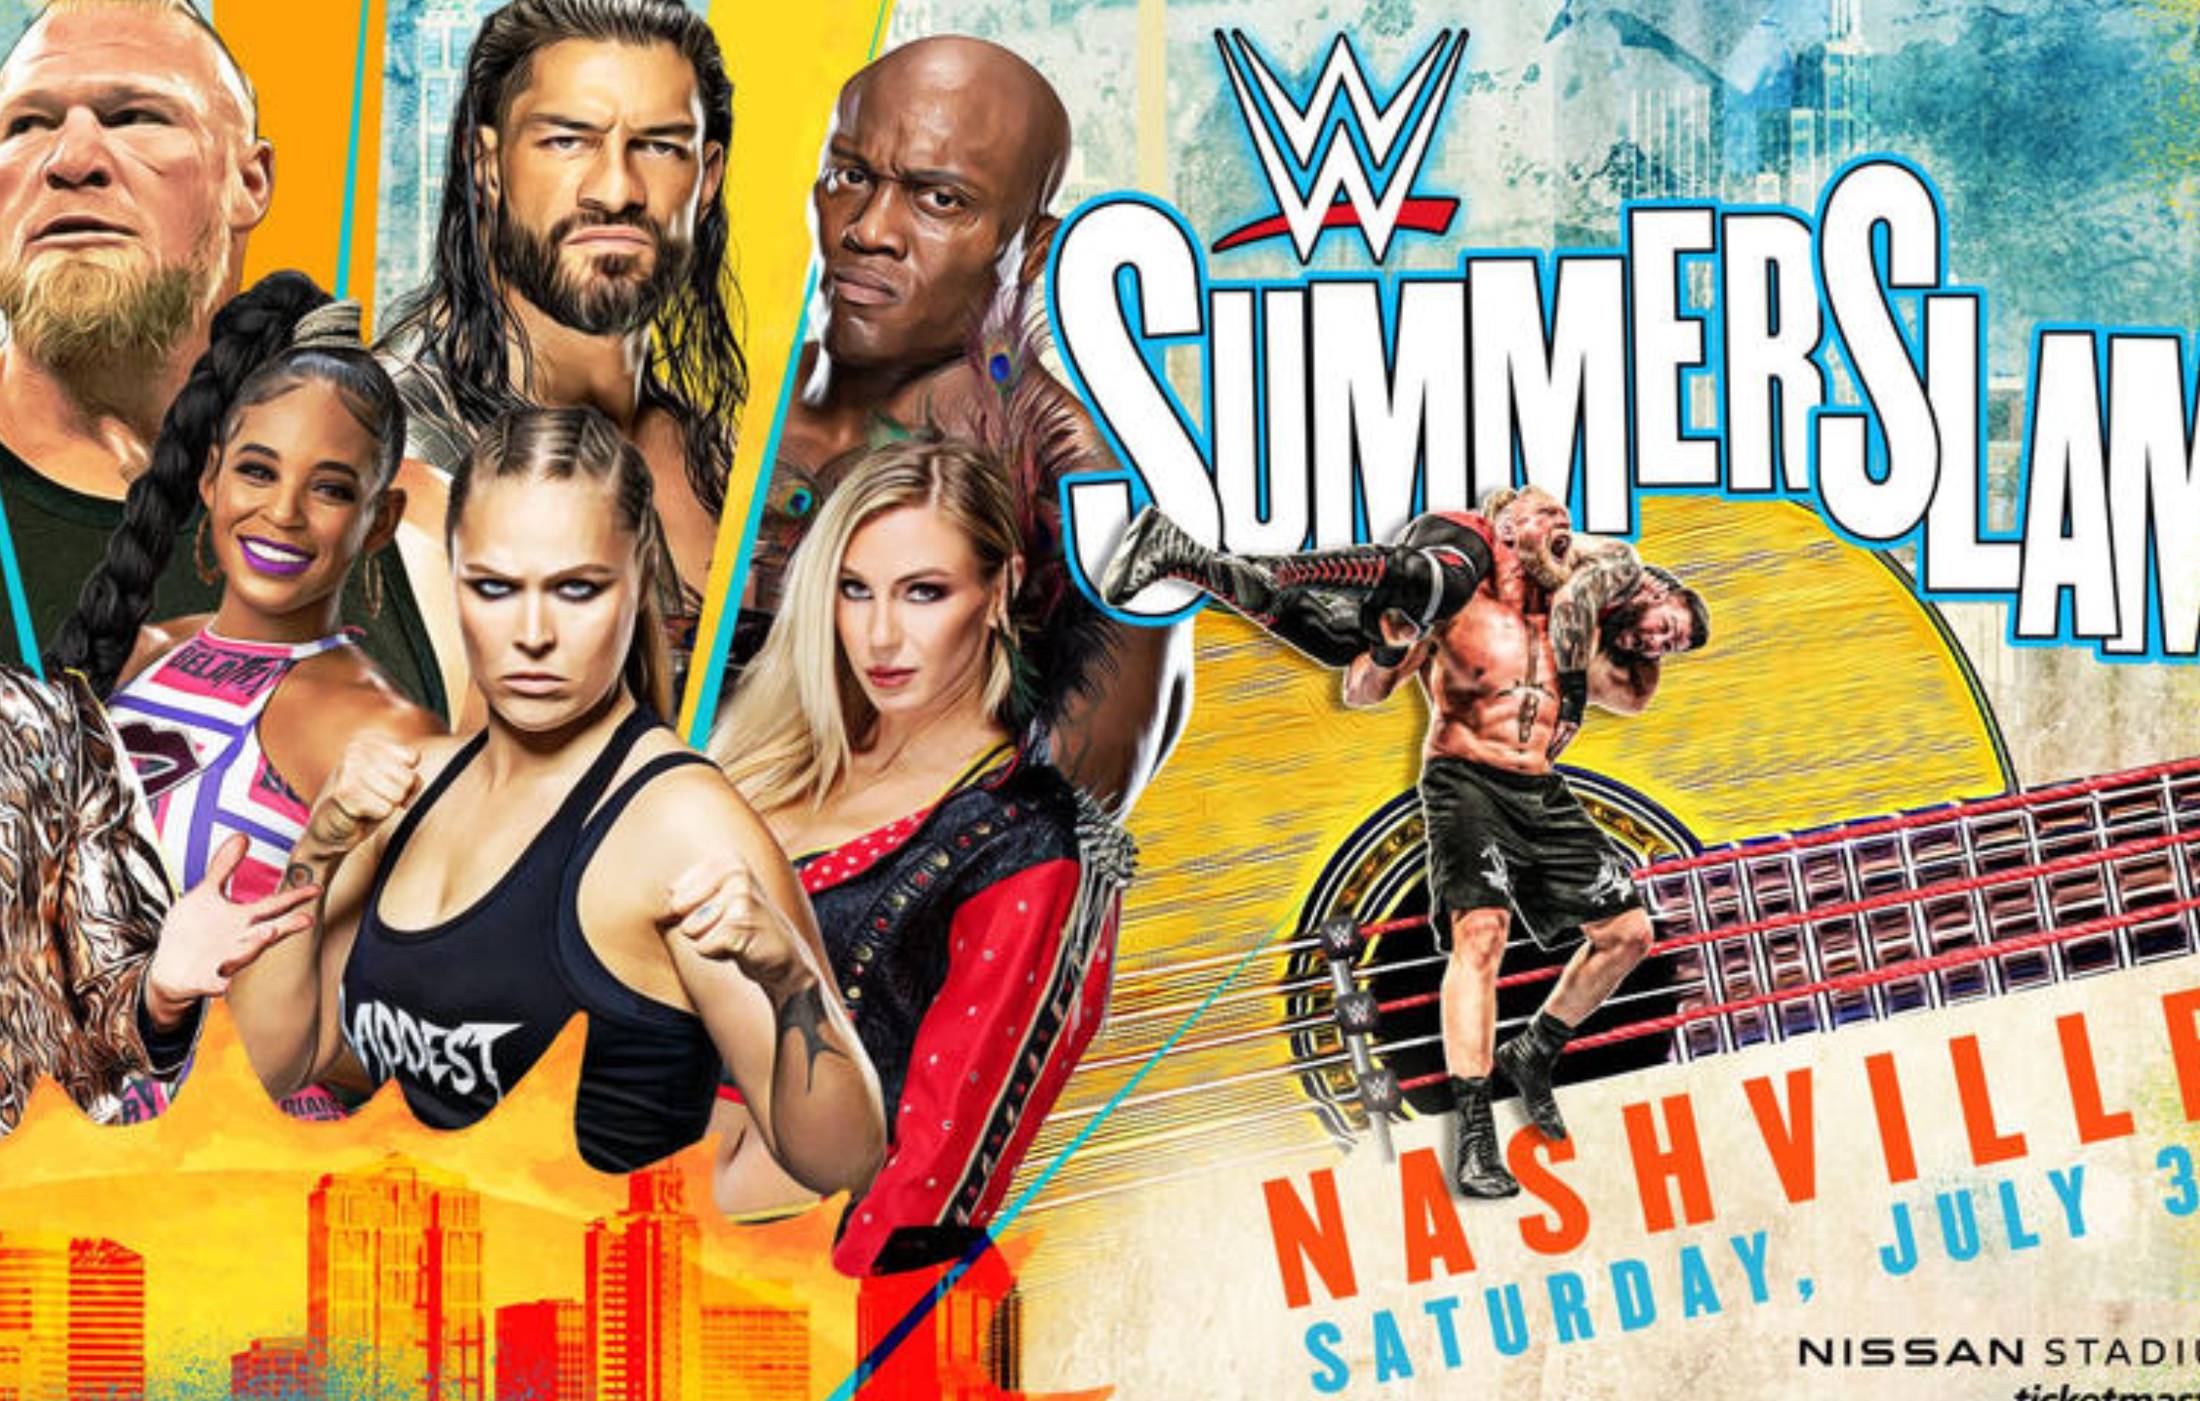 One of WWE SummerSlam's big matches has been cancelled